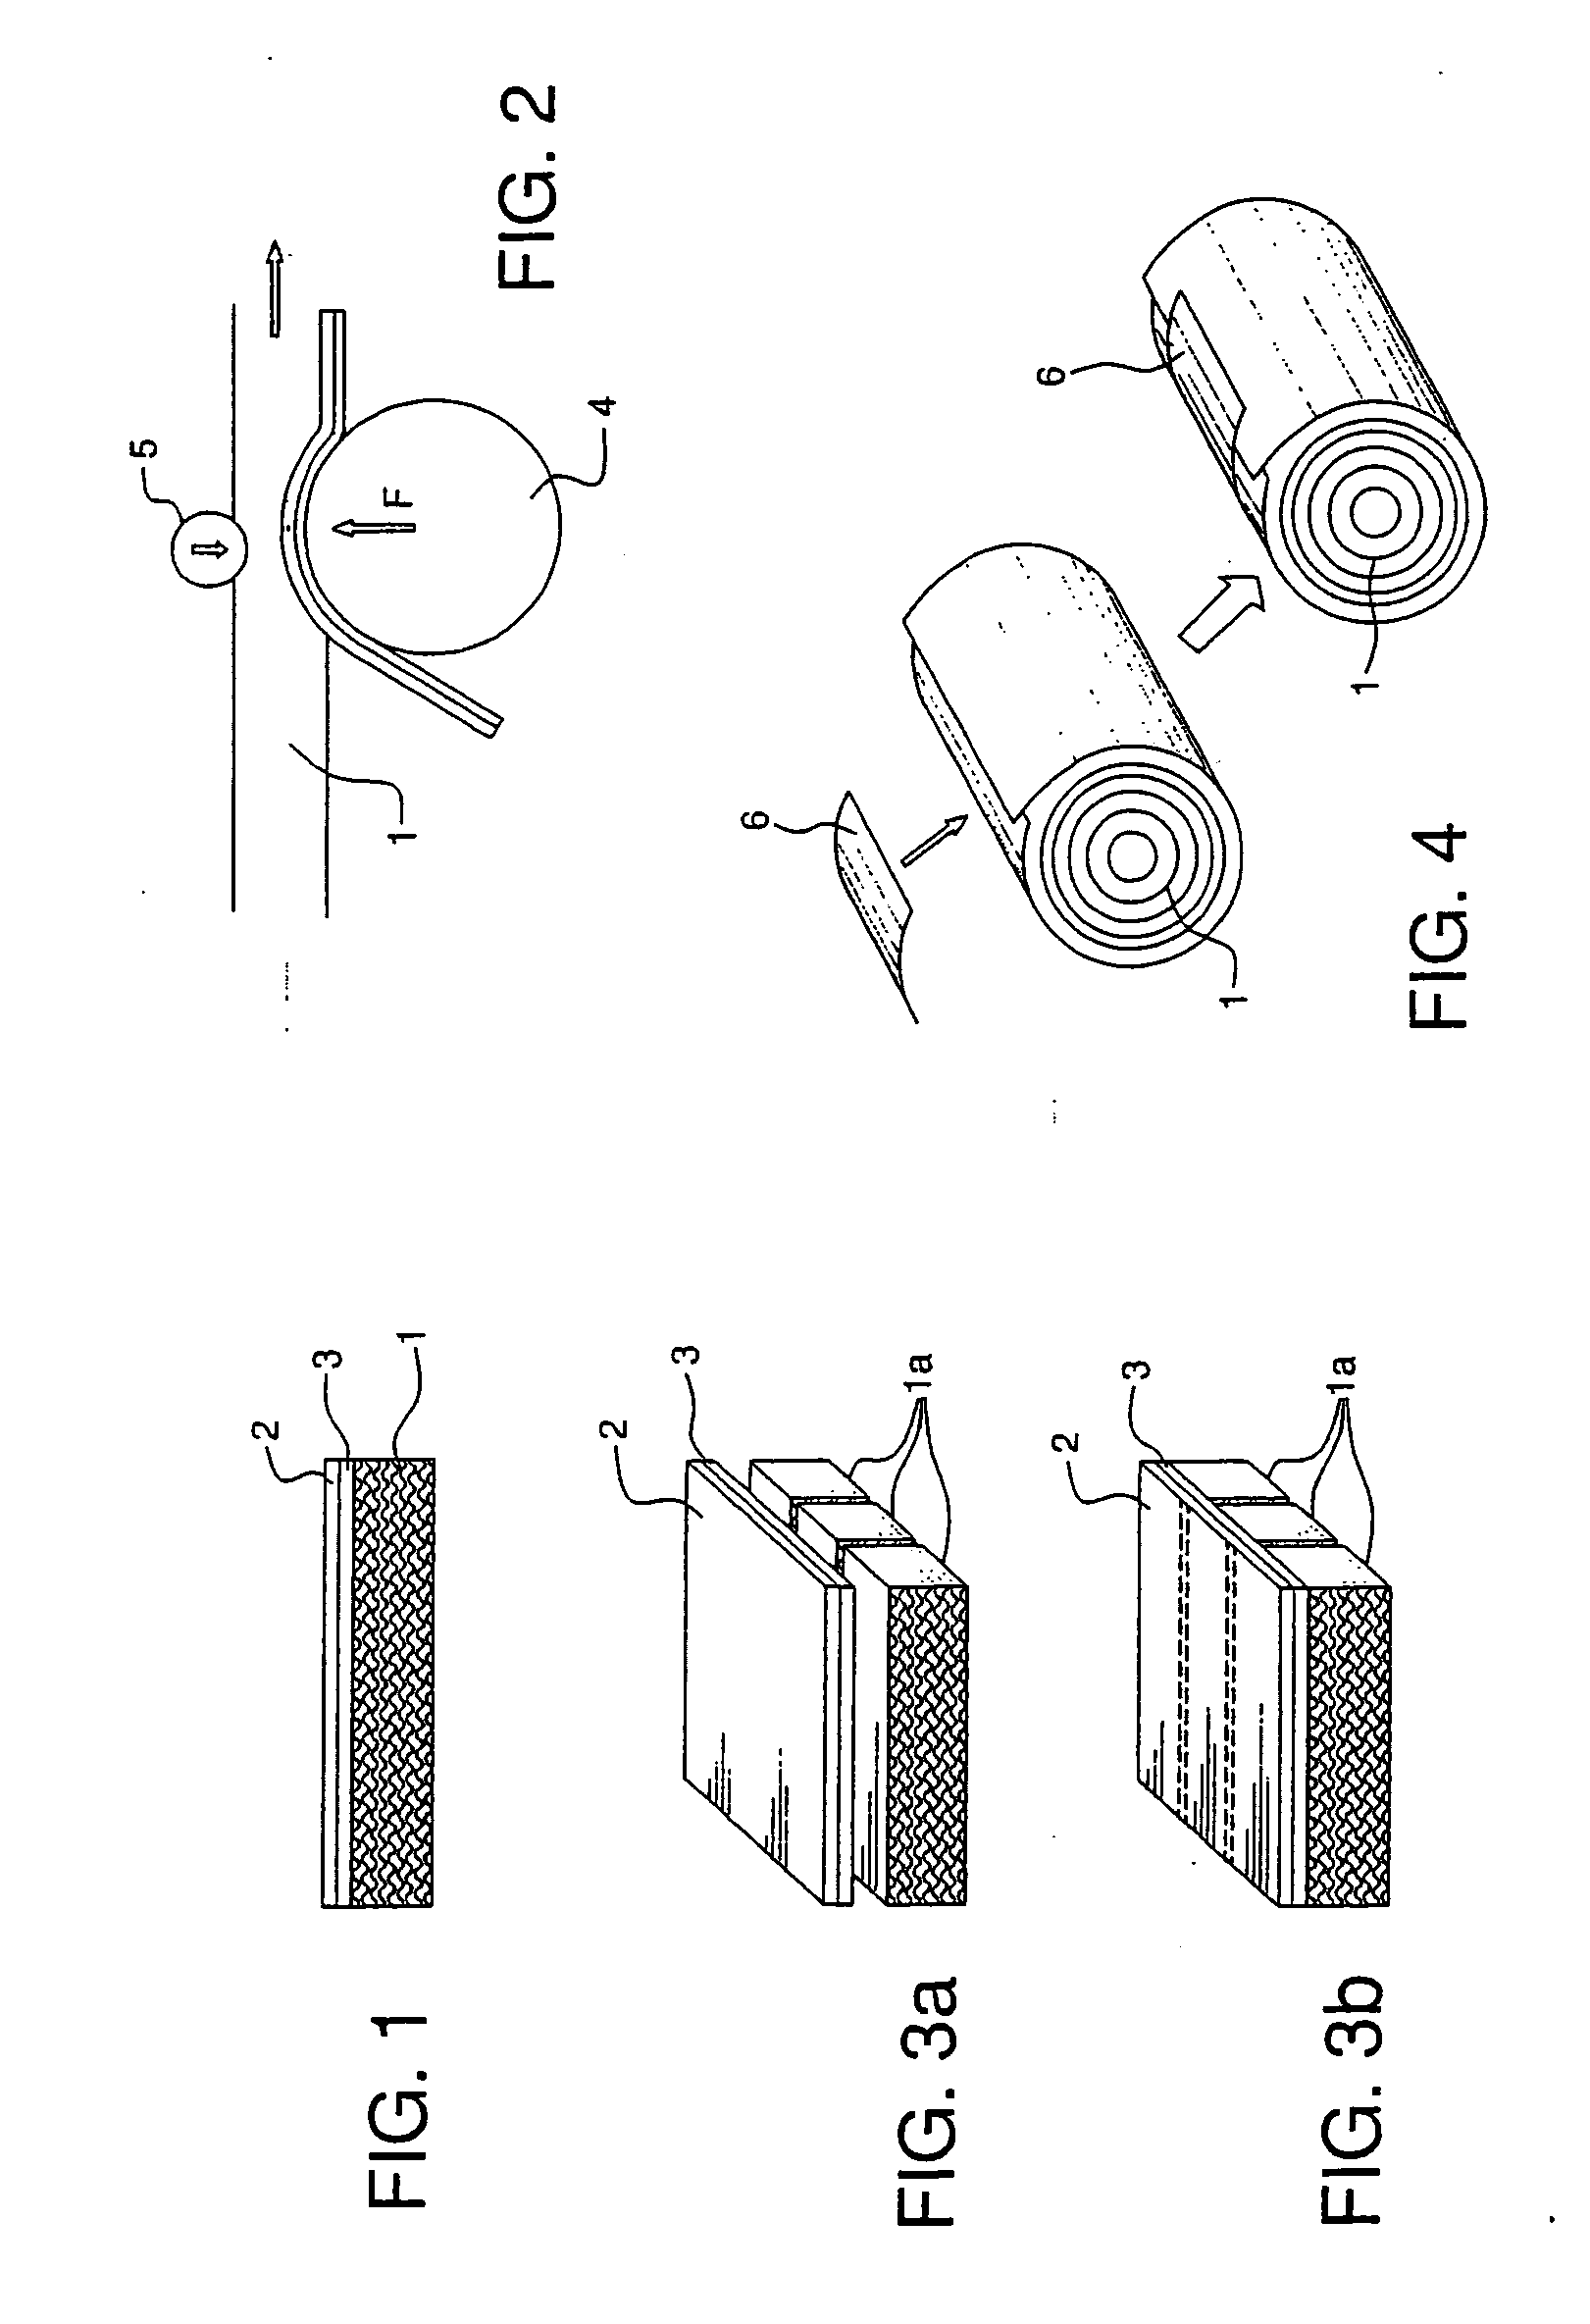 Mineral wool covered with complexes formed of organic polymer laminates